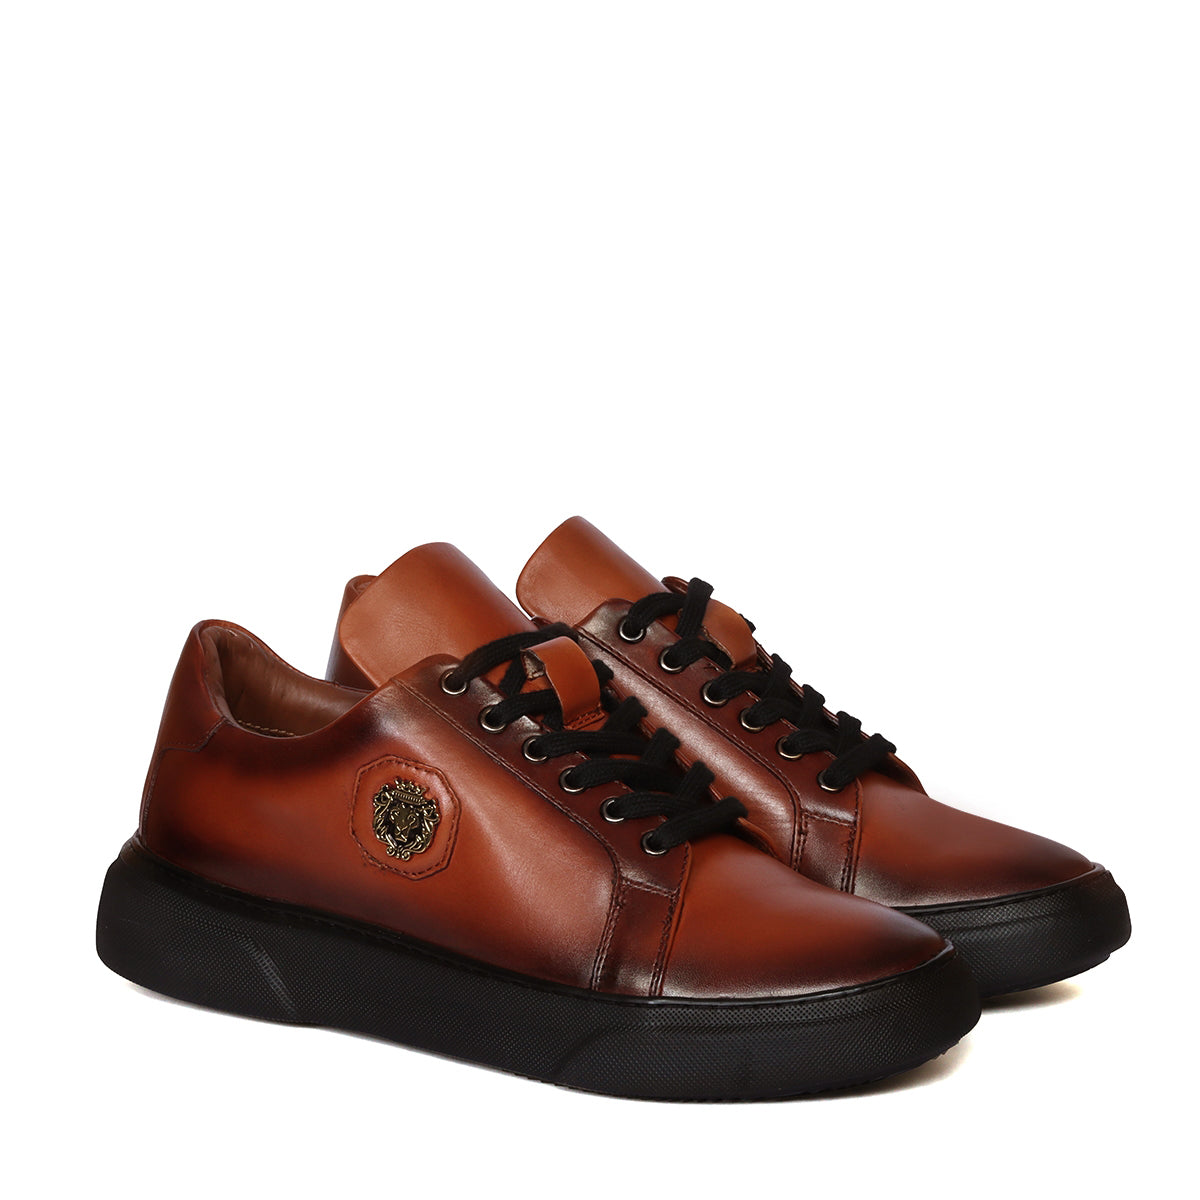 Orangish Tan Leather Lace-up Sneakers with Metal Lion logo on Quarter